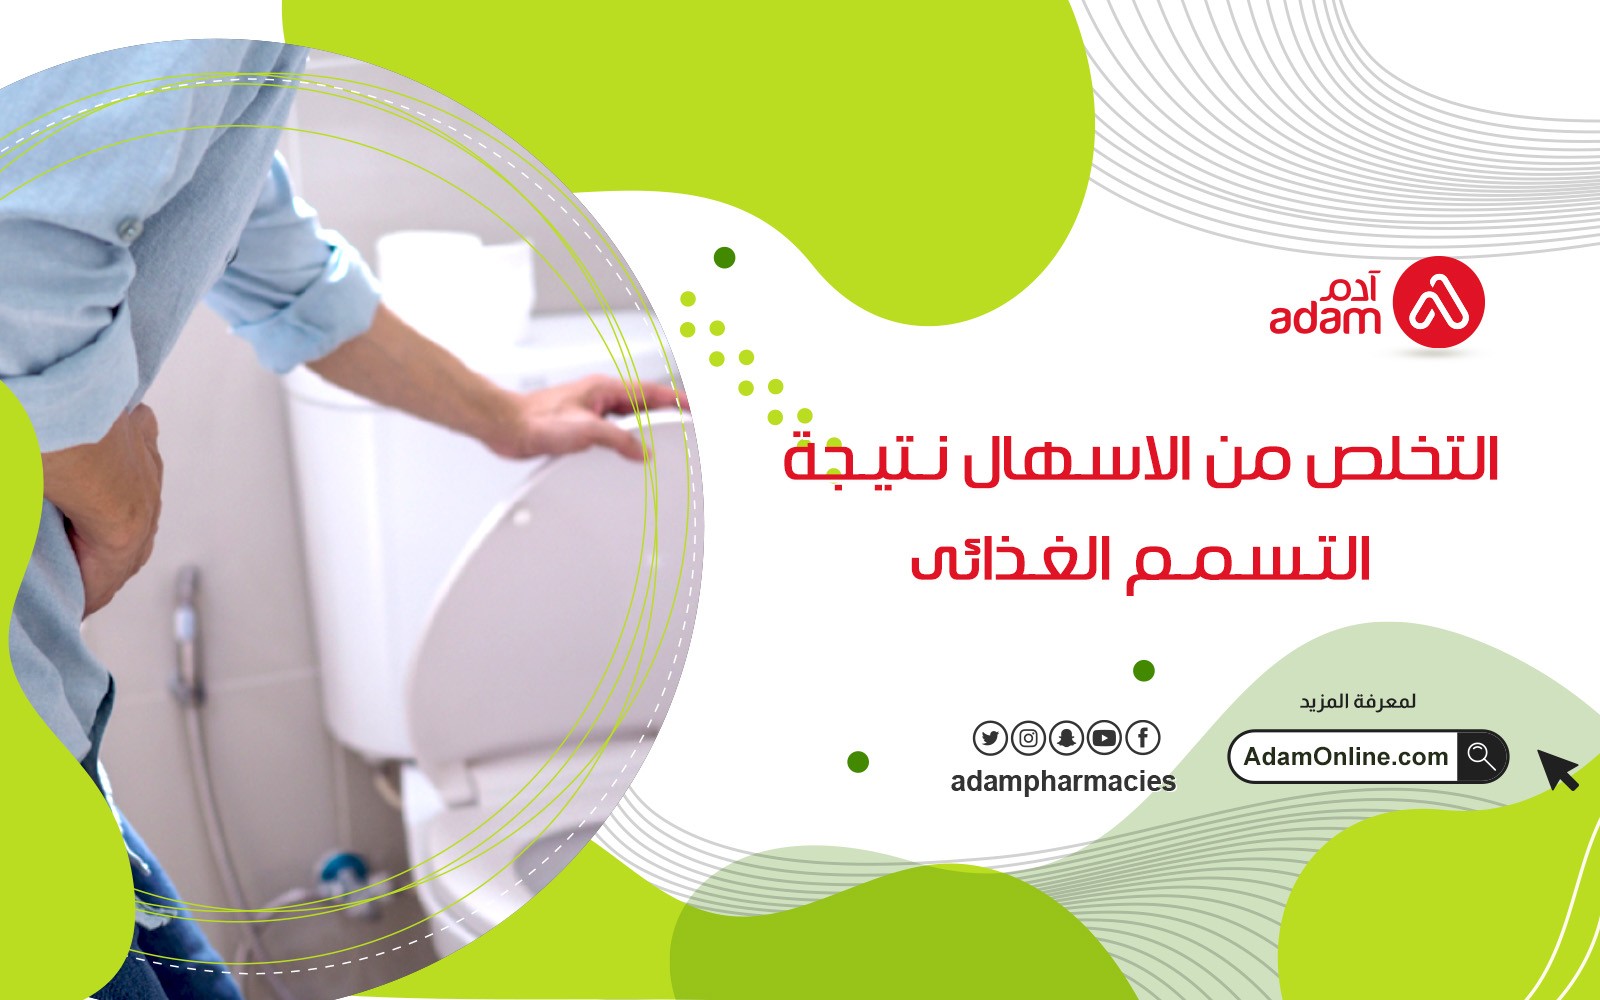 Get rid of diarrhea due to food poisoning